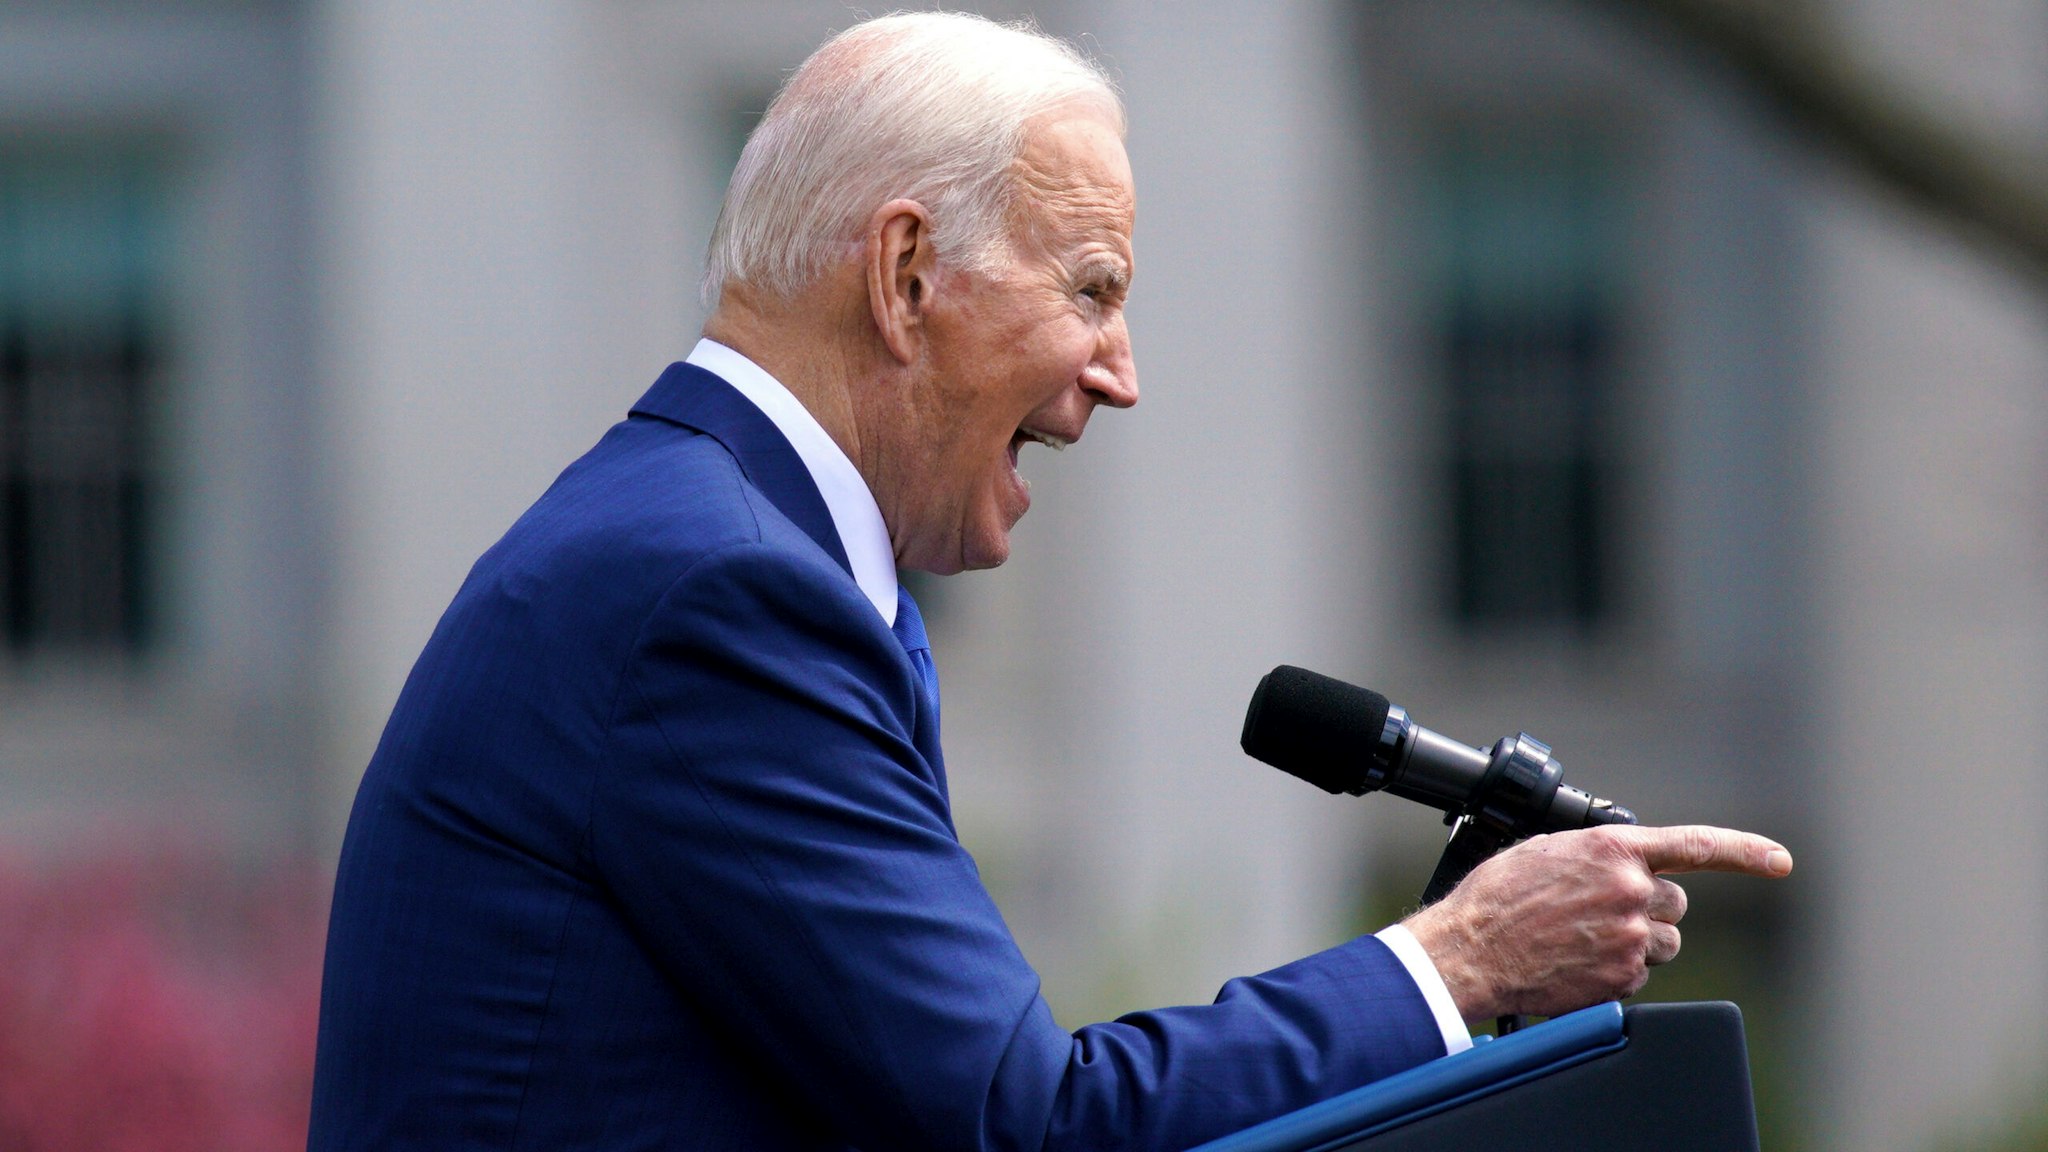 U.S. President Joe Biden speaks during a ceremony for Judge Ketanji Brown Jackson on the South Lawn of the White House in Washington, D.C., U.S., on Friday, April 8, 2022. Jackson was confirmed yesterday to the U.S. Supreme Court, making history as the first Black woman to ever join its ranks while leaving the ideological balance on the nation's highest court unchanged.